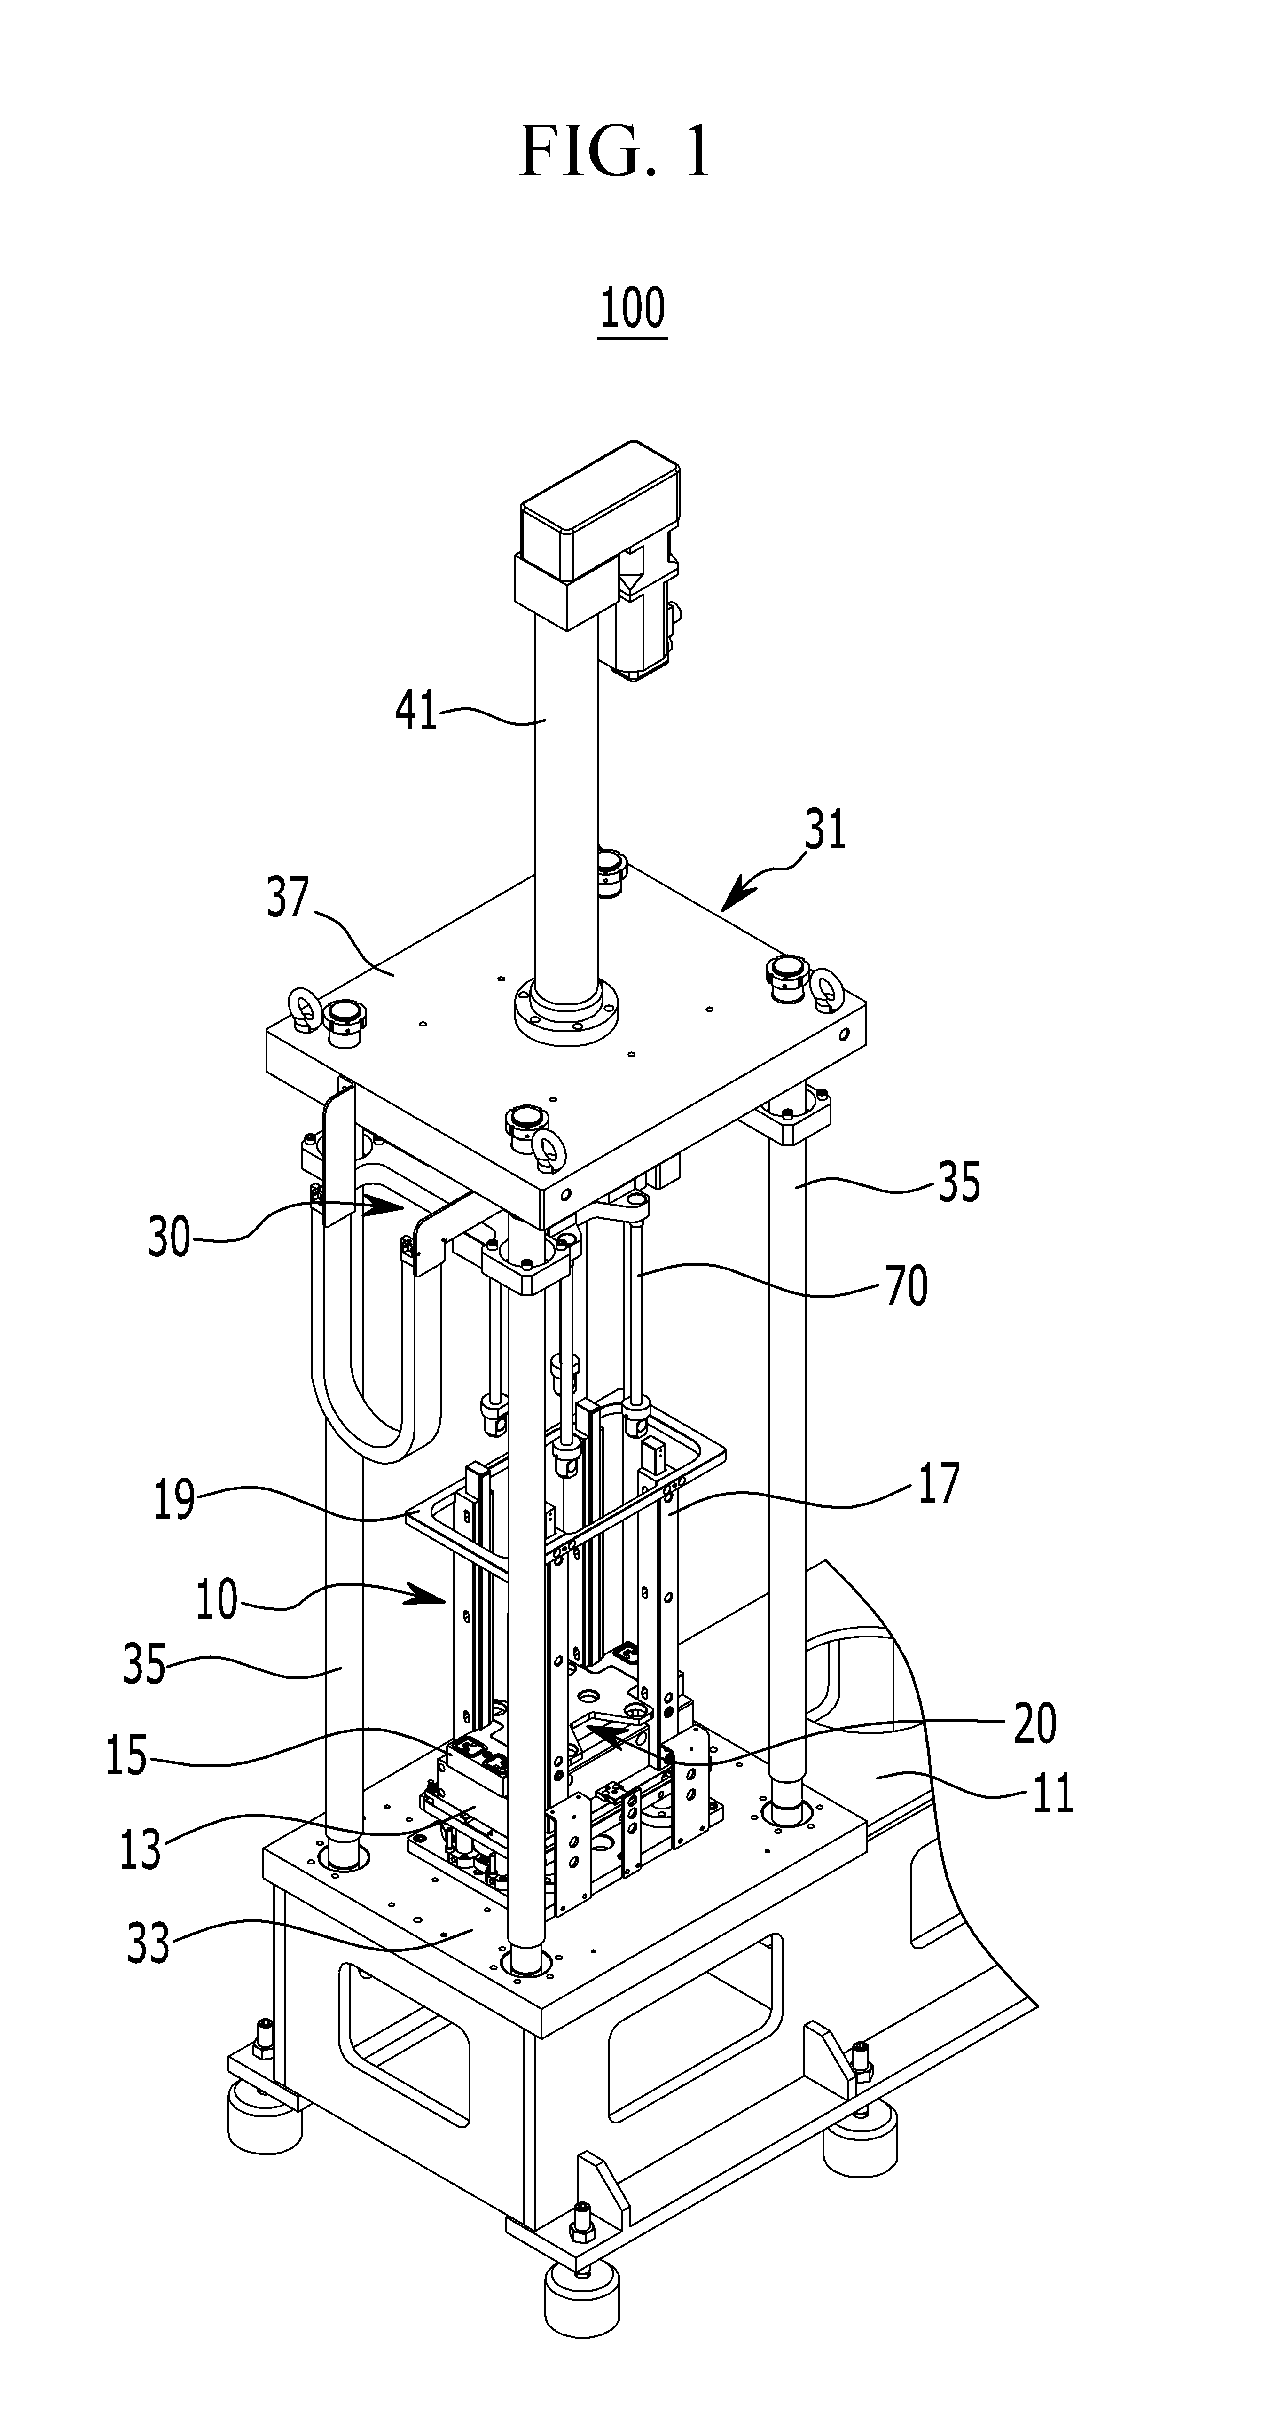 Apparatus for assembling fuel cell stack